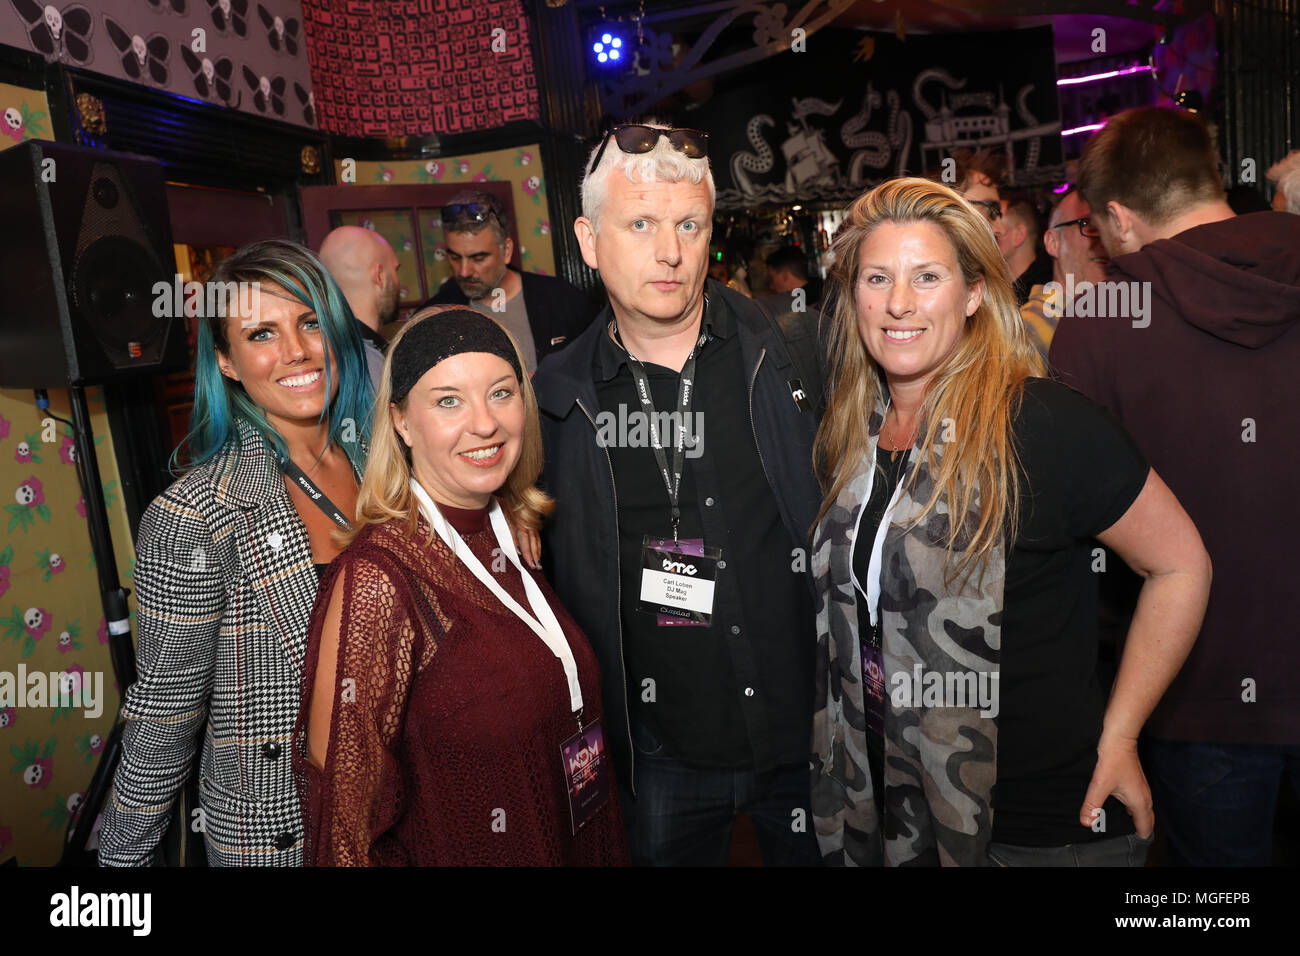 Brighton, UK, 26 April 2018. Women in Dance Music Collective launch party as part of the Brighton Music Conference 2018.  26th April 2018. The UK's foremost electronic music conference returns for its 5th year to Brighton Dome and various venues across the city from 25 - 28 April 2018.  Native Instruments presents Women in Dance Music Collective networking event in collaboration with She Said So, PRS Keychange Initiative & Women Produce Music & KOKORO GIN. Carly Wilford, Sacha Wall, Carl Loben, Jade Thompson Stock Photo